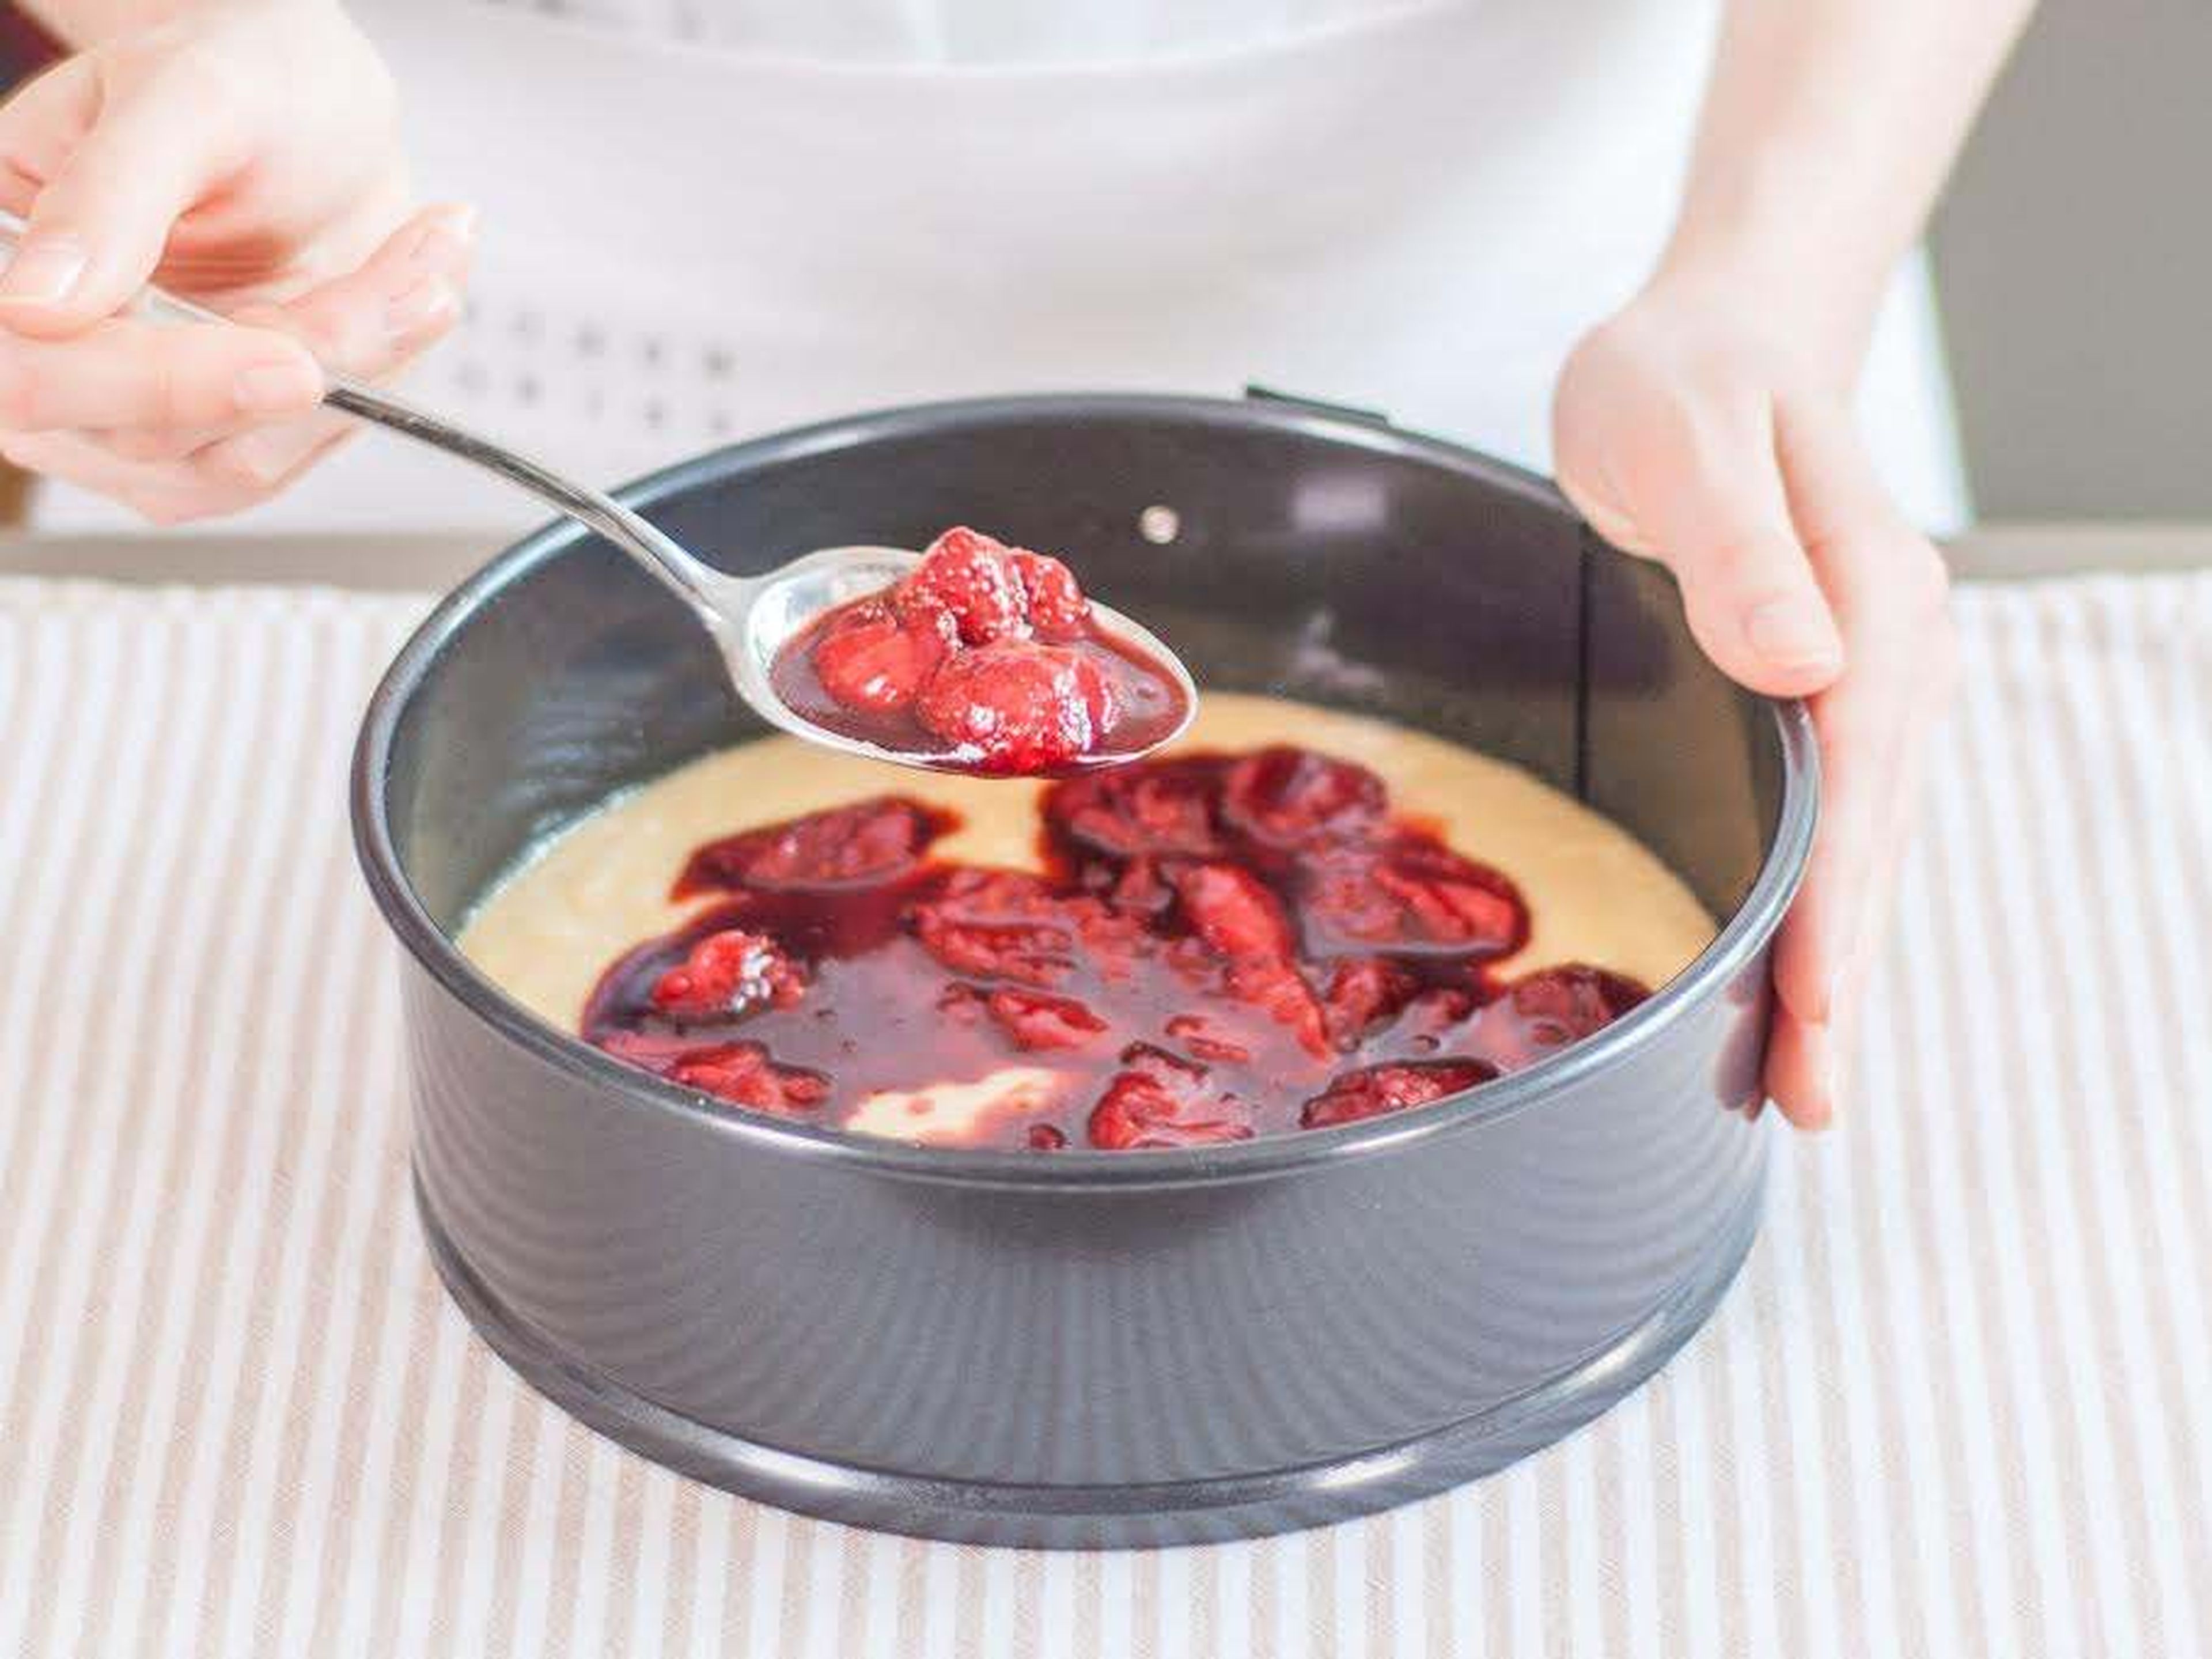 Turn oven down to 175°C/350°F. Brush springform pan with olive oil. Pour half of batter into pan, then top with roasted strawberries and their juices, stopping about half-a-thumb’s length from the perimeter.